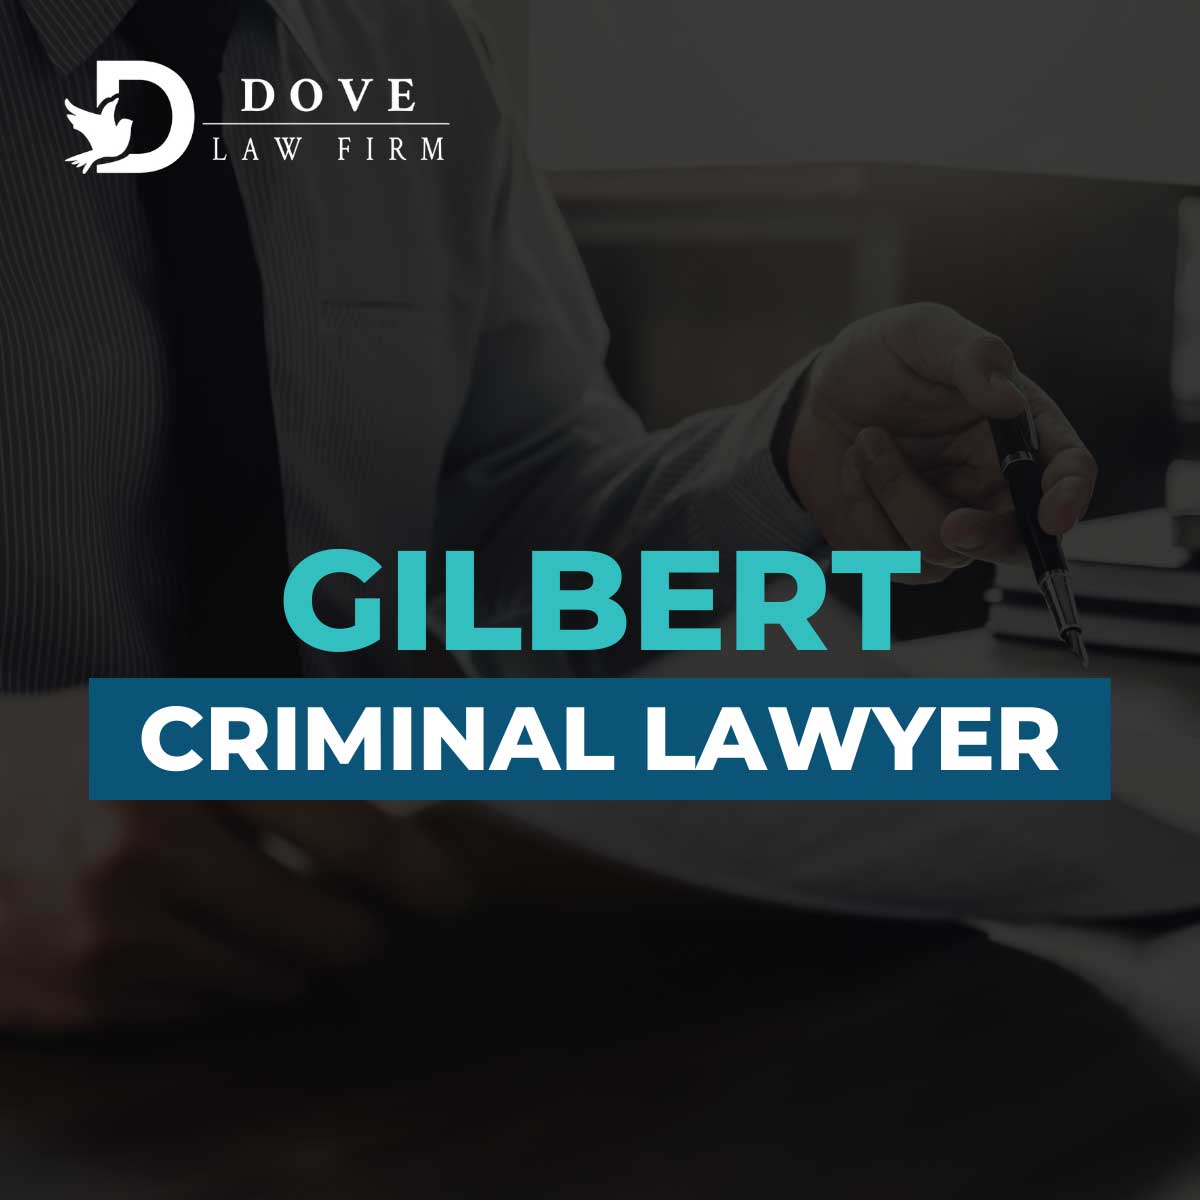 Gilbert Criminal Lawyer Dove Law Firm